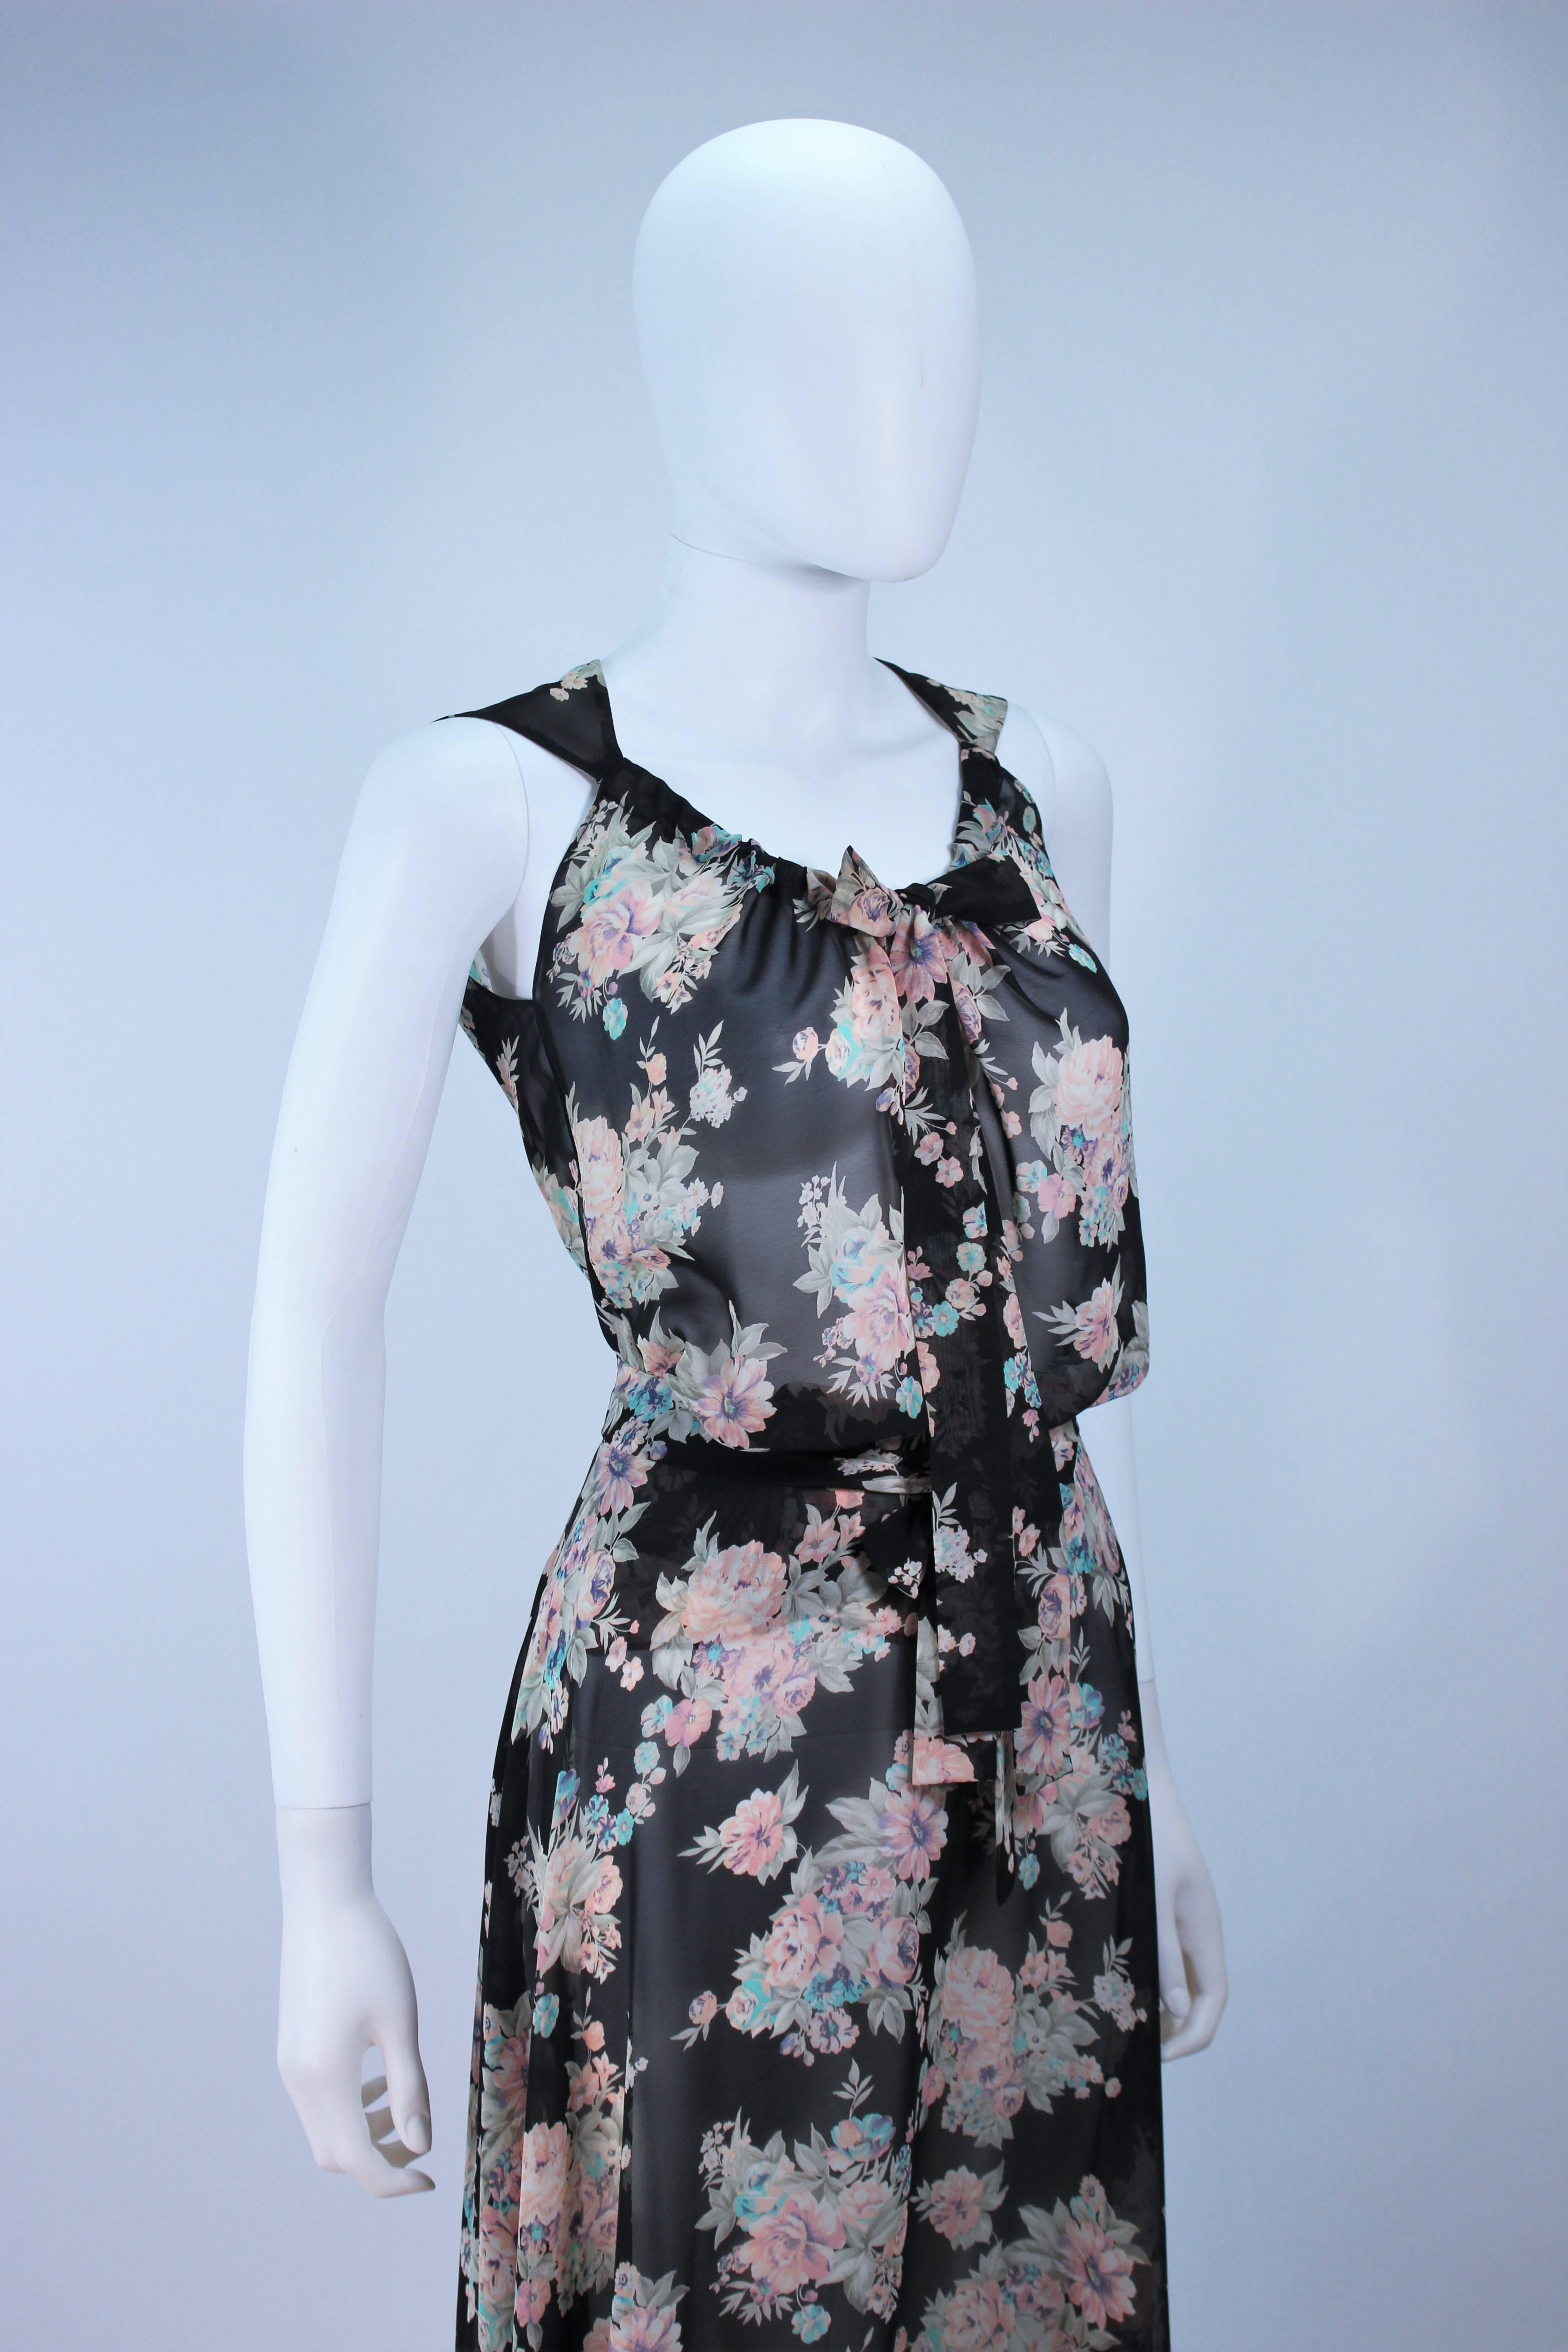 ELIZABETH MASON COUTURE Chiffon Floral Blouse, Skirt, and Belt In New Condition For Sale In Los Angeles, CA